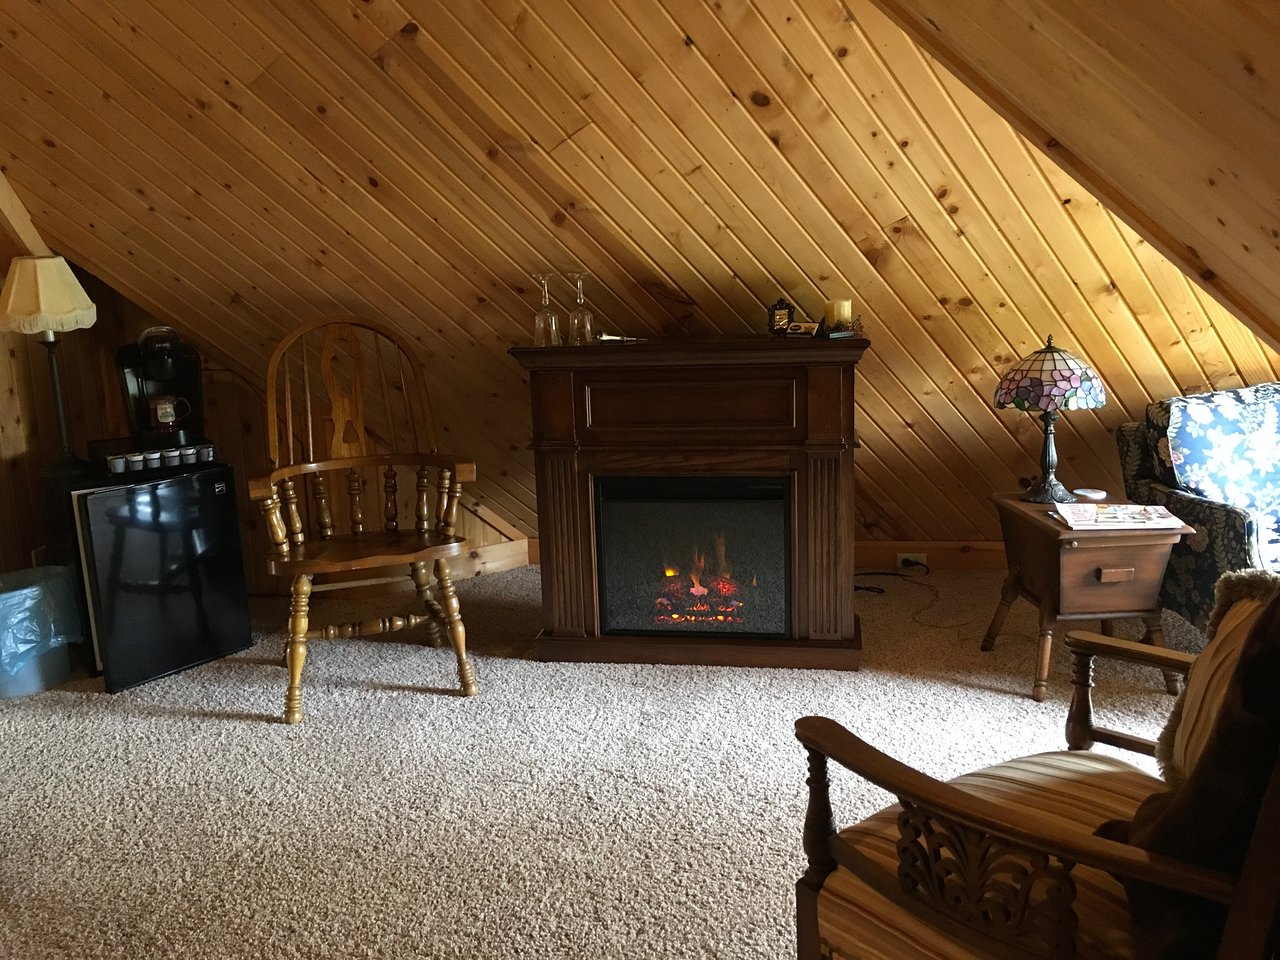 Burbank Fireplace New Anna V S Bed and Breakfast Prices & B&b Reviews Lanesboro